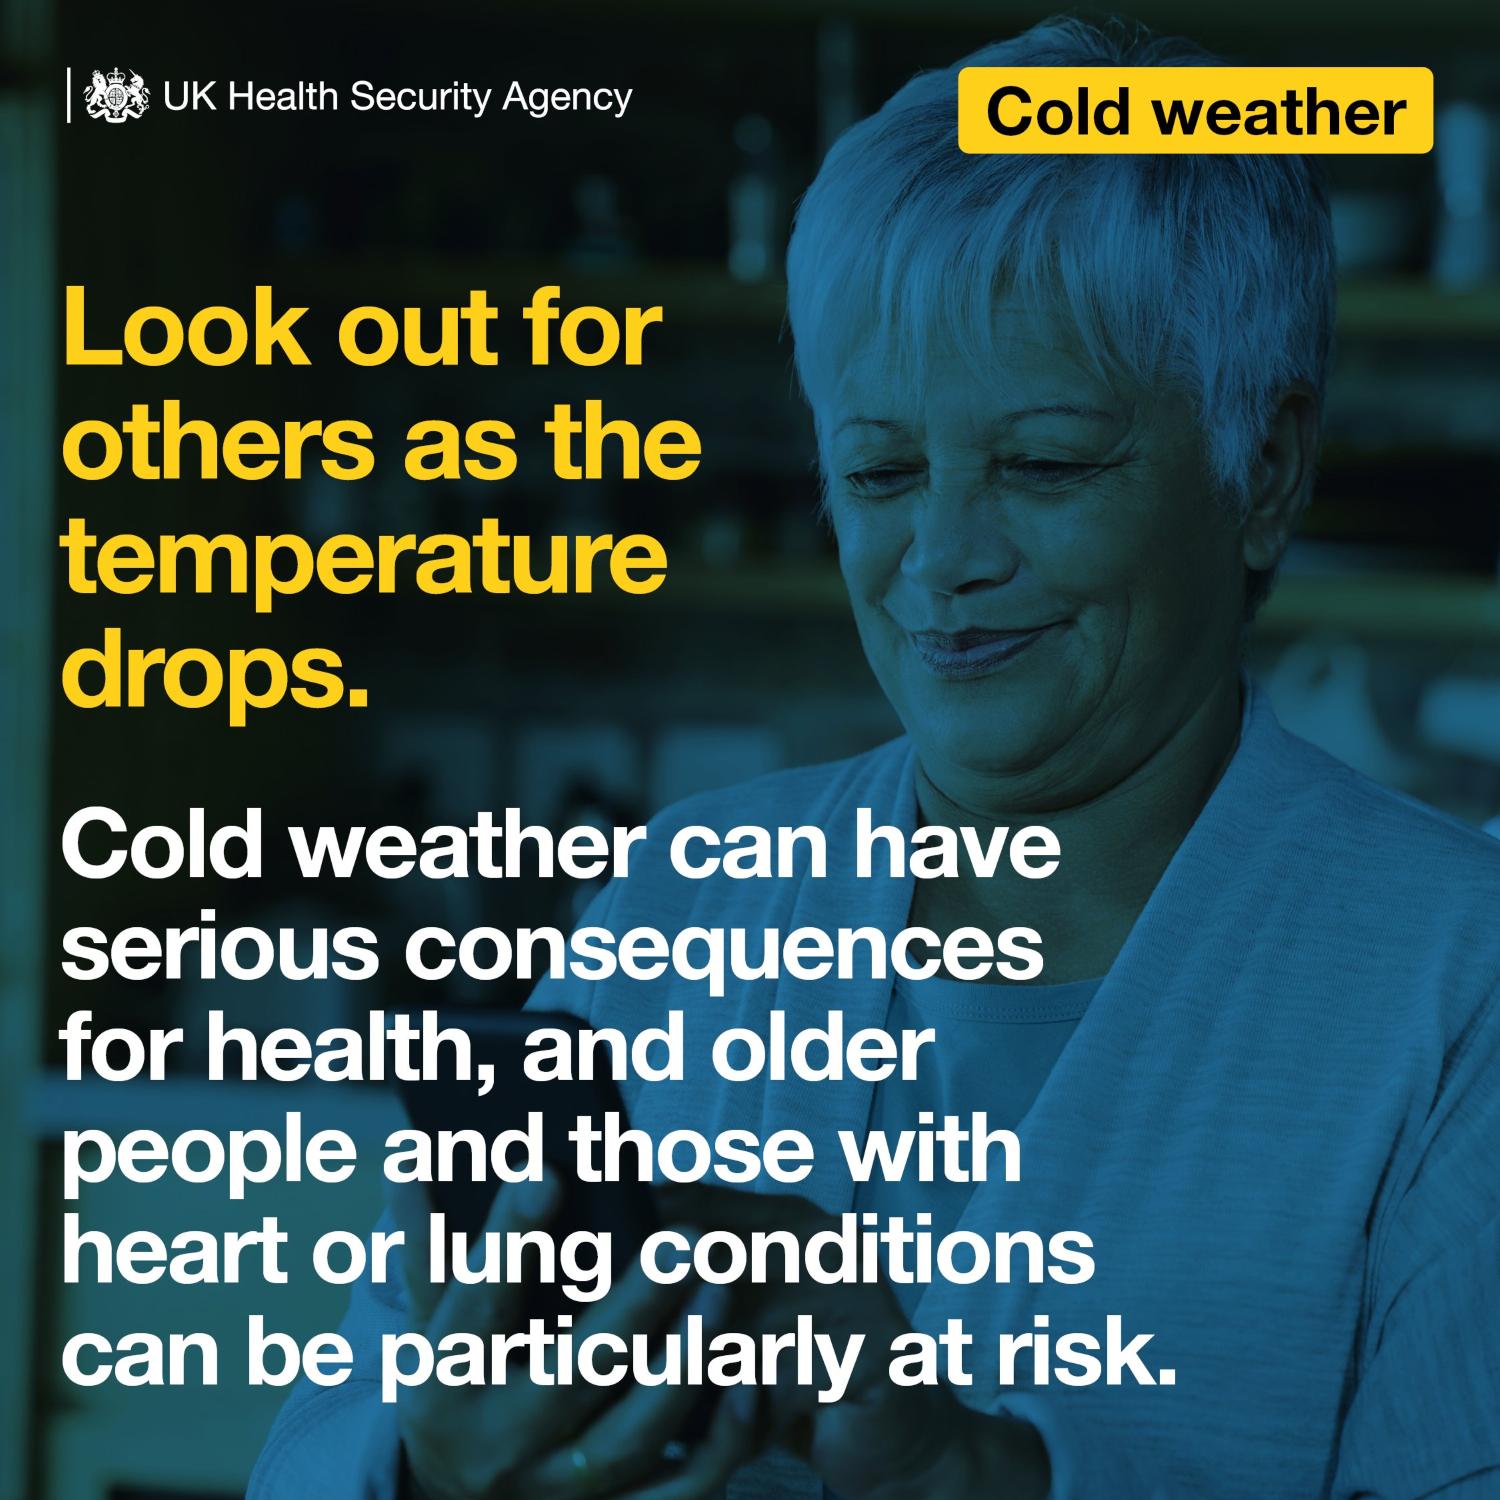 UK Health Security Agency cold weather warning graphic. Cold weather can have serious consequences for health, and older people and those with heart or lung conditions can be particularly at risk.